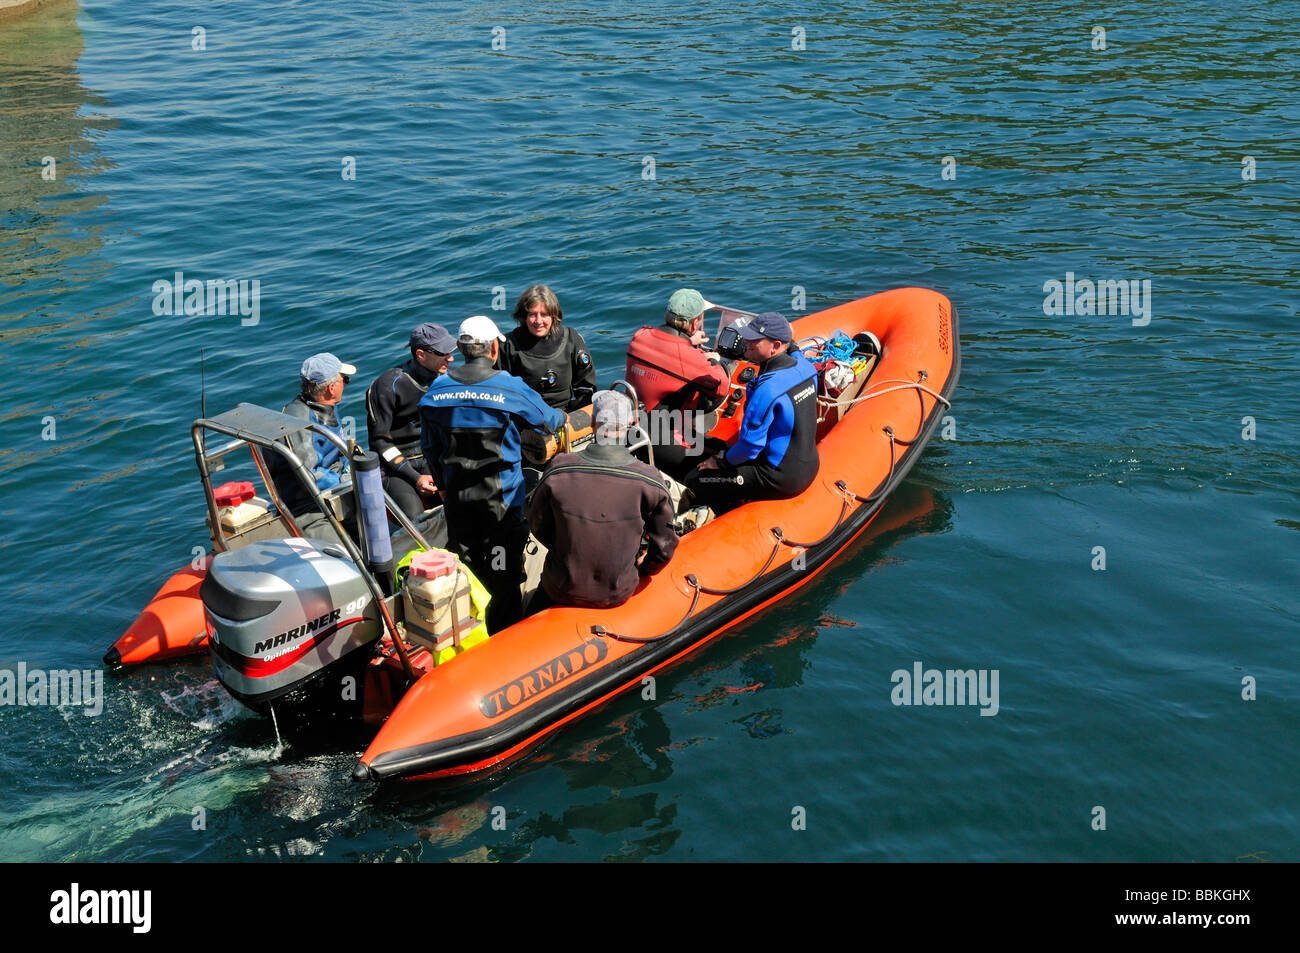 Scuba divers on orange RIB outboard motorboat filled with people speeding across water Stock Photo